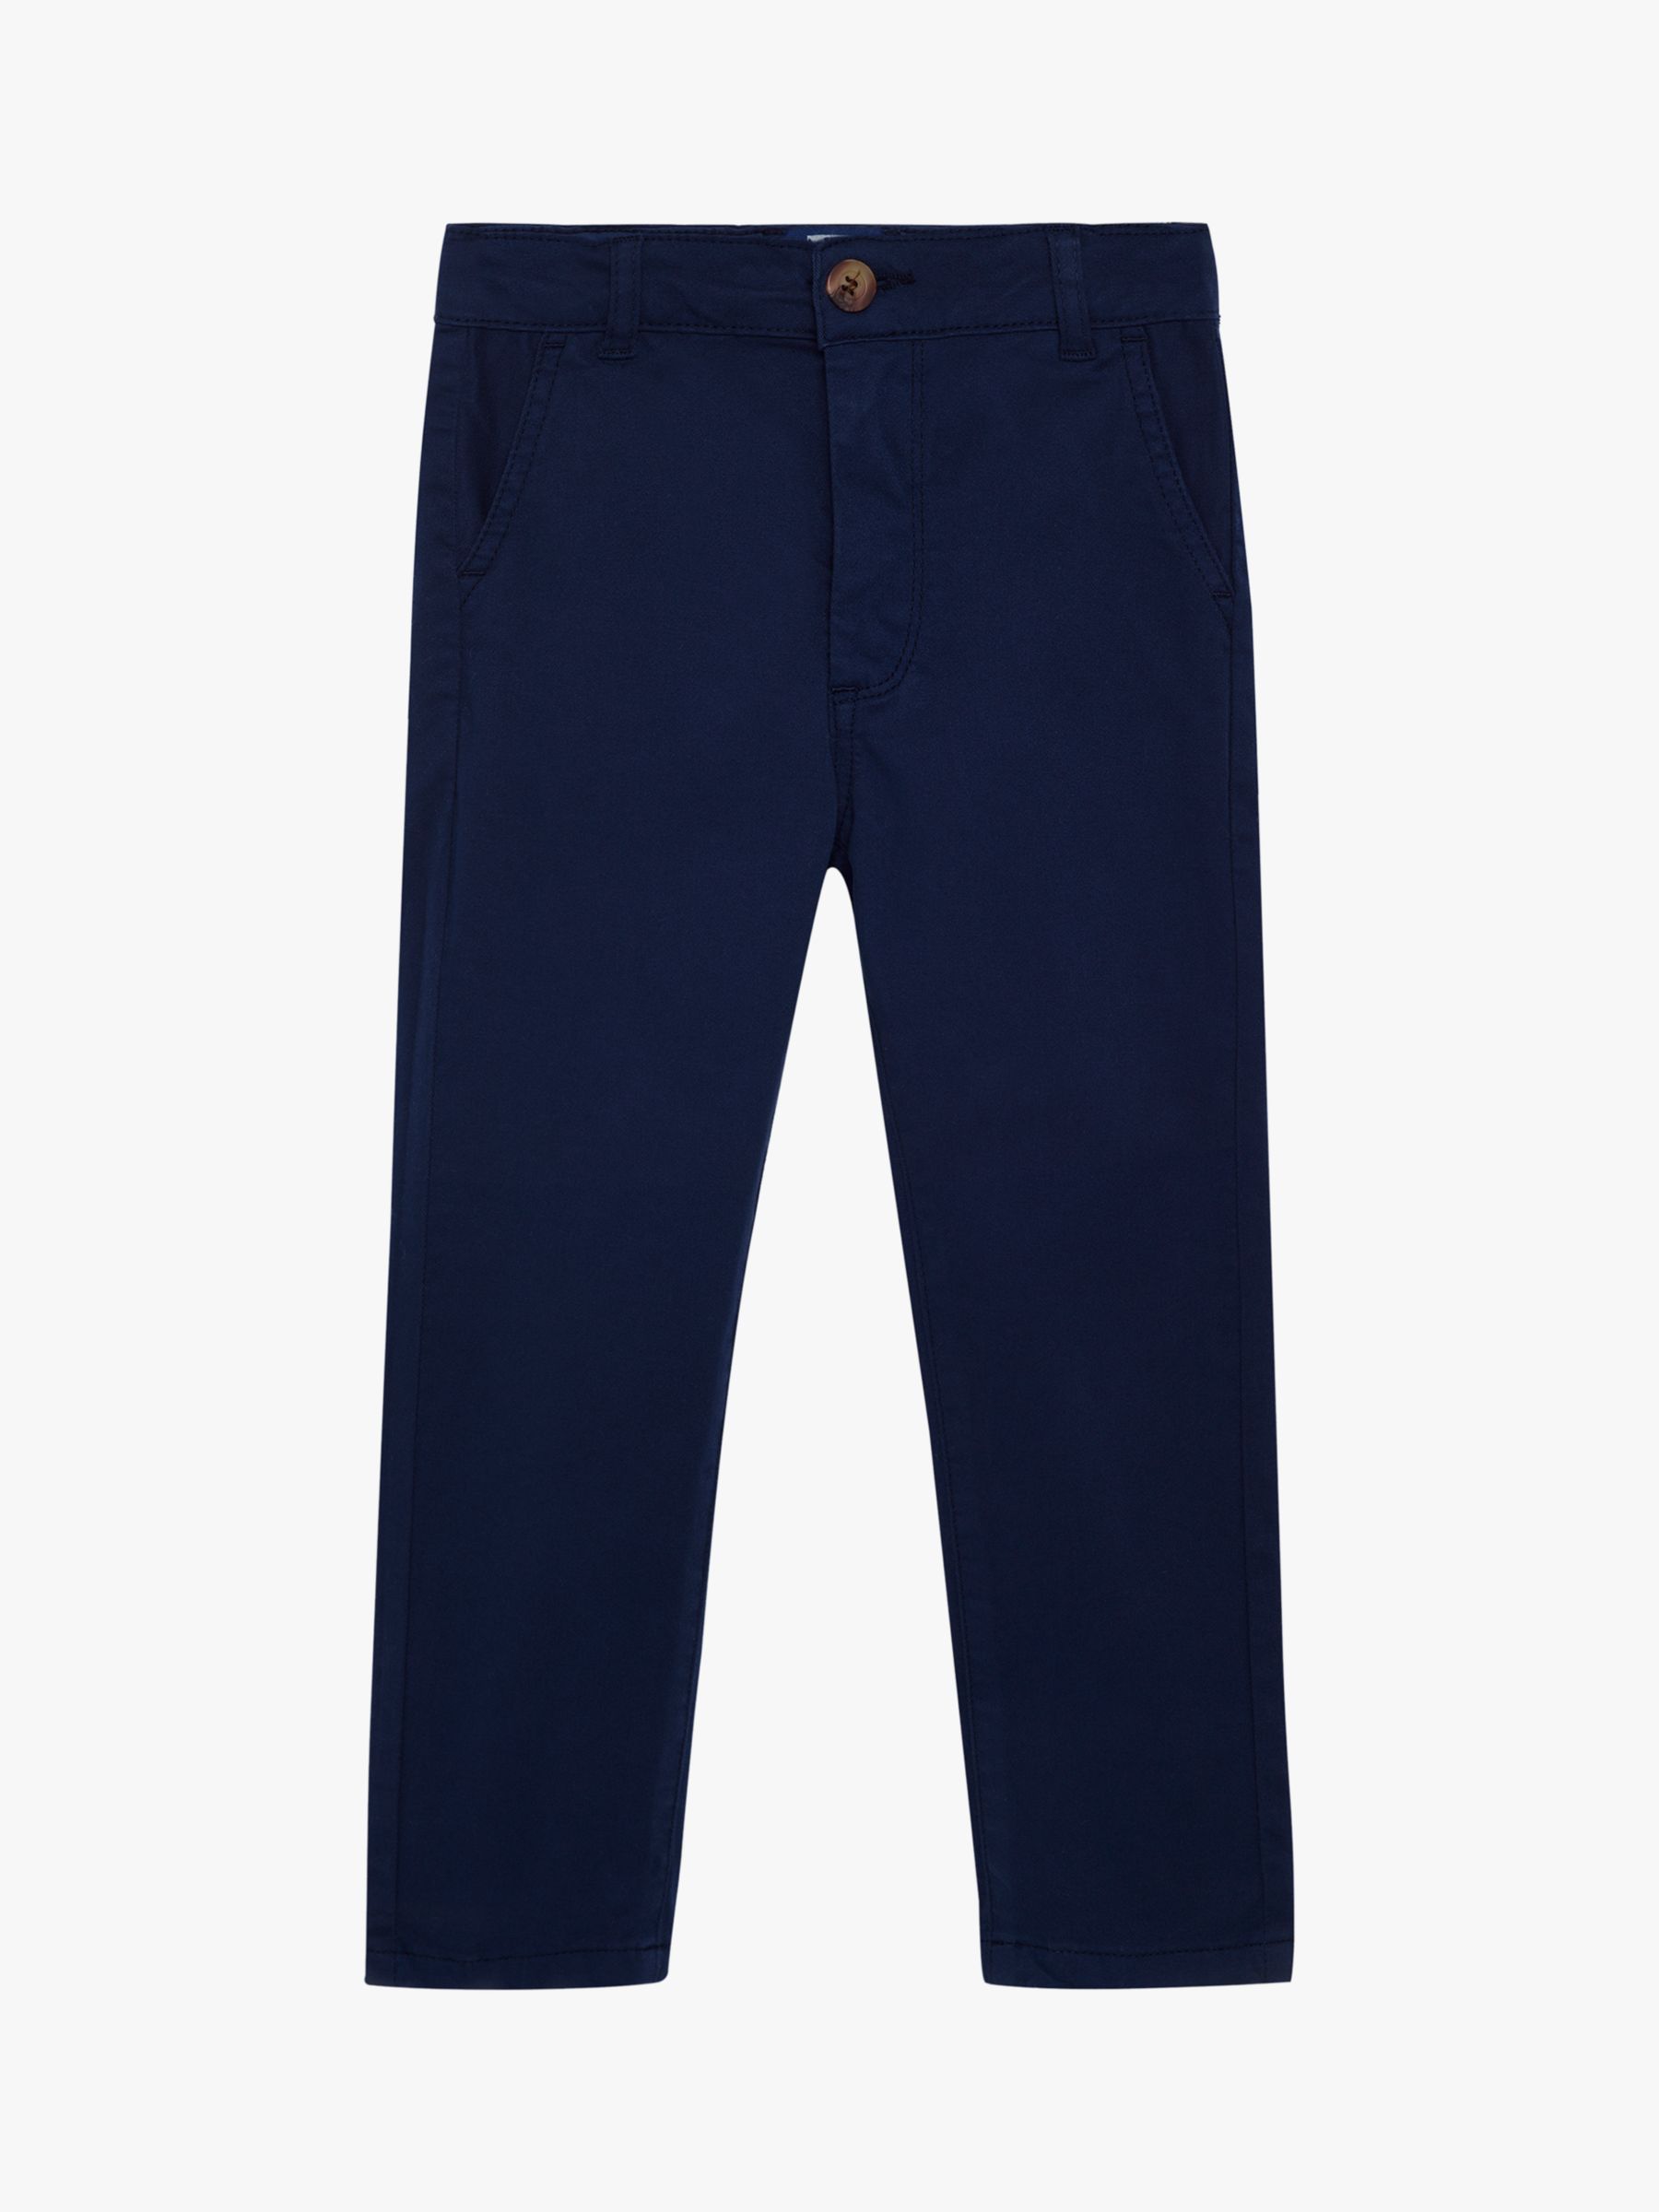 Buy Trotters Kids' Jacob Trousers Online at johnlewis.com